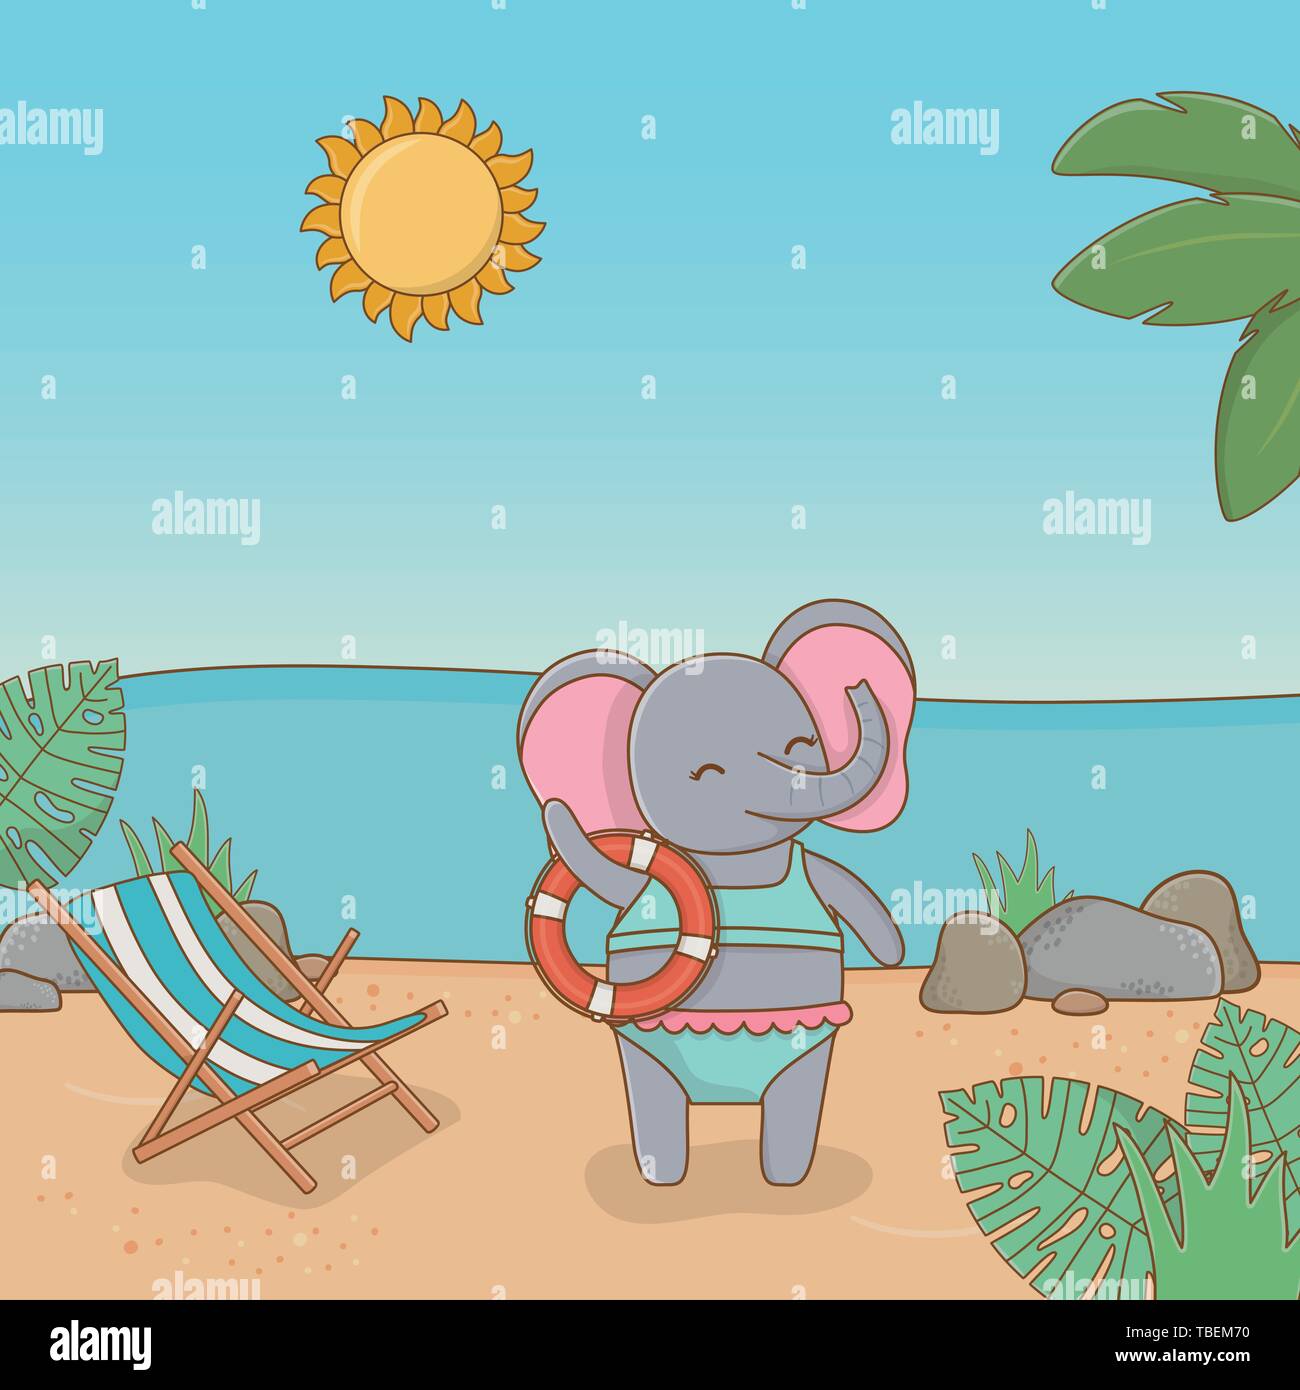 How to draw Scenery of Summer Vacation.Step by step(easy draw) - YouTube